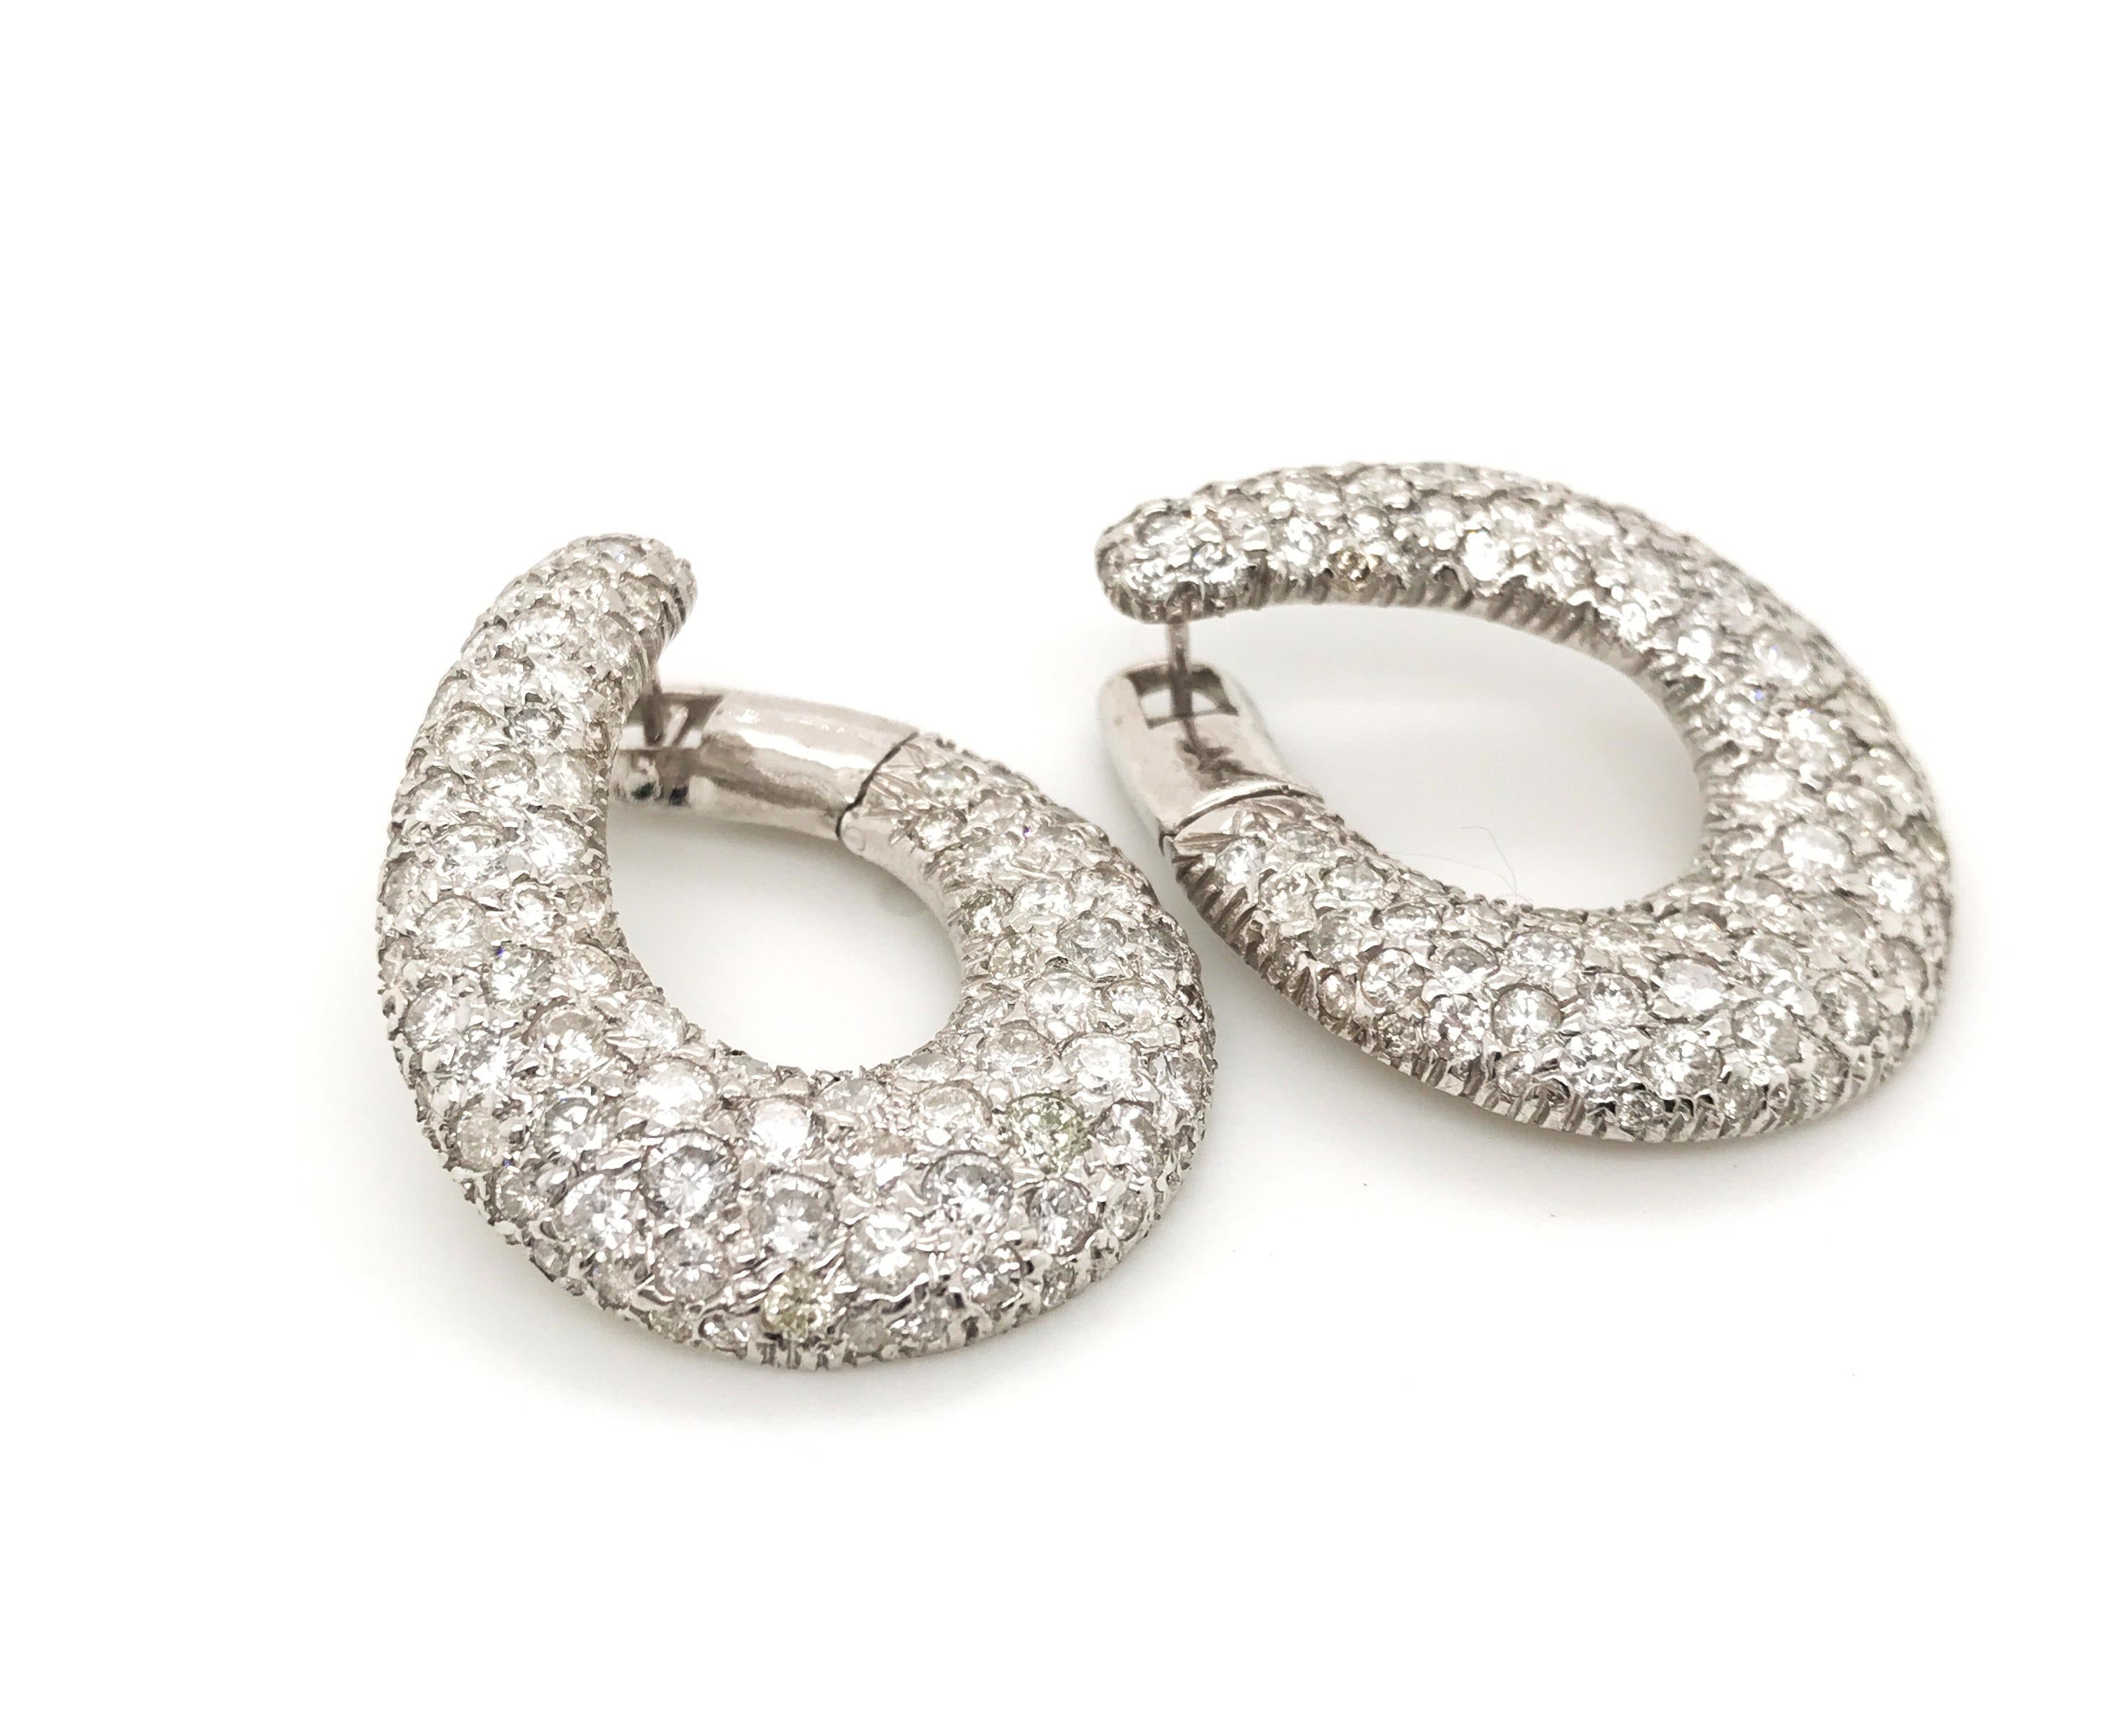 Are you looking for some diamond hoop earrings that are different and have style? Look no further than these glorious Italian made diamond hoops that sit so perfectly on the ears. Hoops are a must in everyone's wardrobe but the problem with hoops is